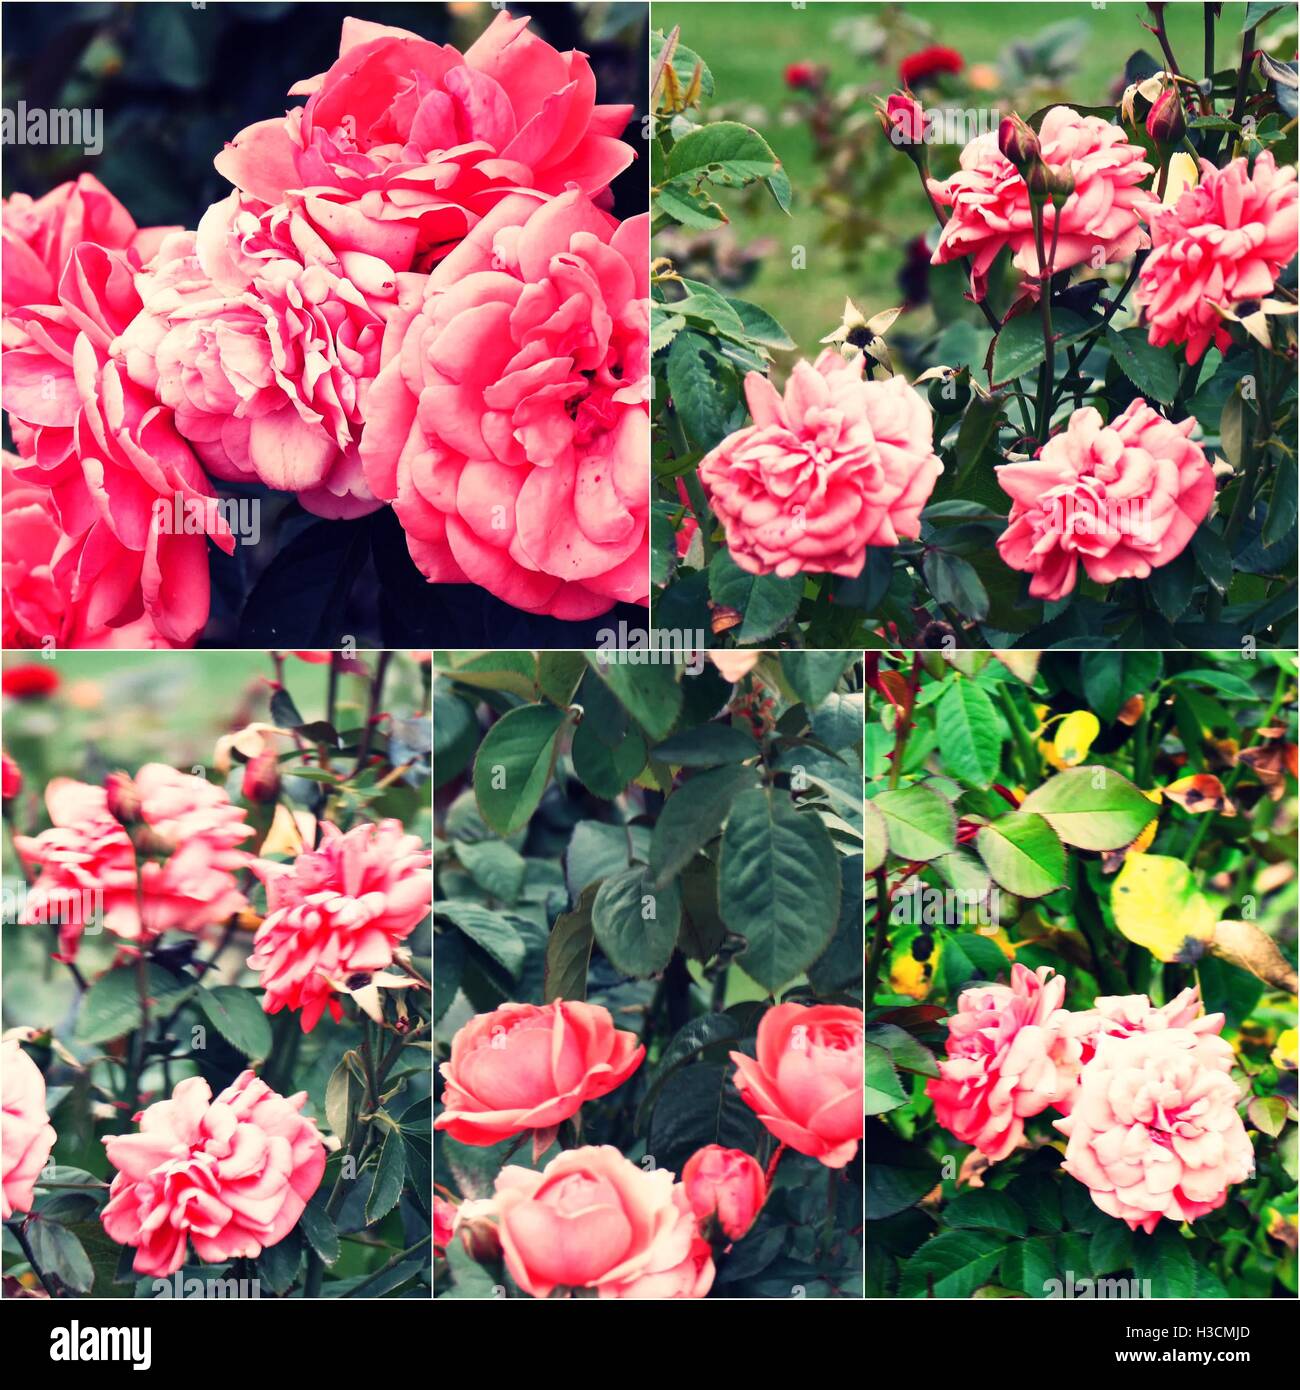 Close-up of garden roses on bush. Collage of colorized images. Toned photos set Stock Photo